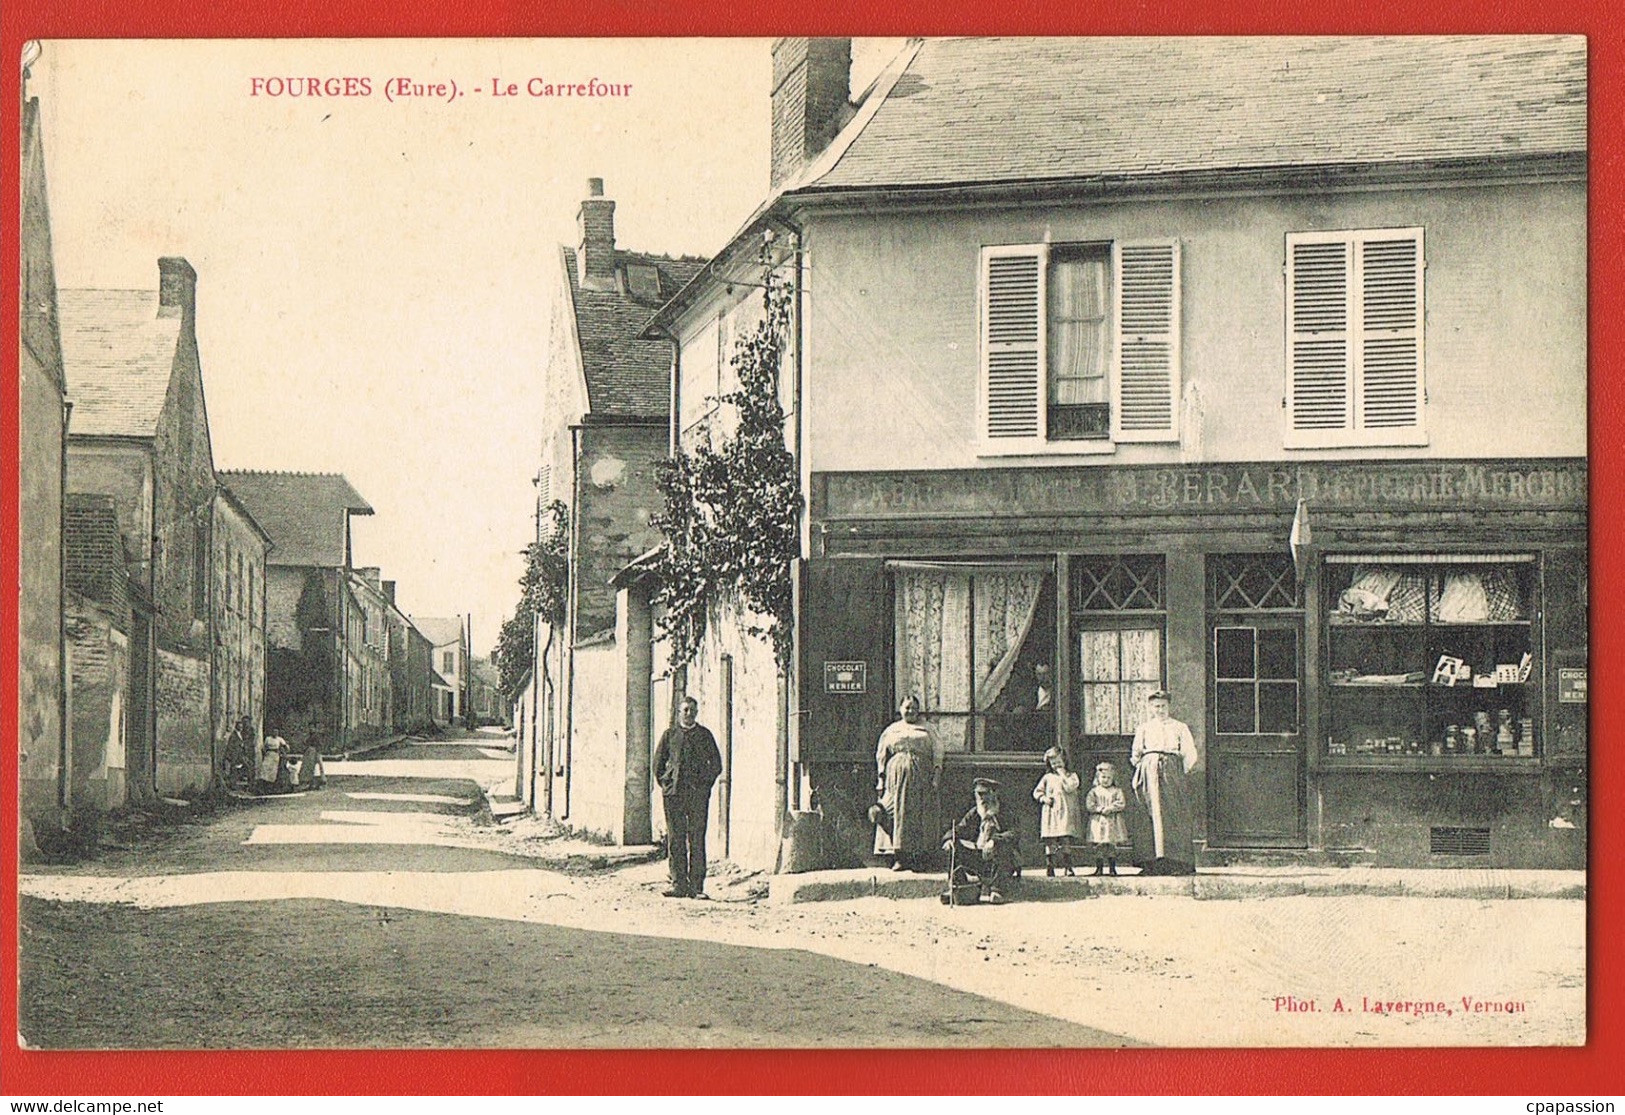 FOURGES -Eure - Le Carrefour-Tabac Epicerie Mercerie BERARD -cpa écrite 1910- Scans Recto Verso - Fourges